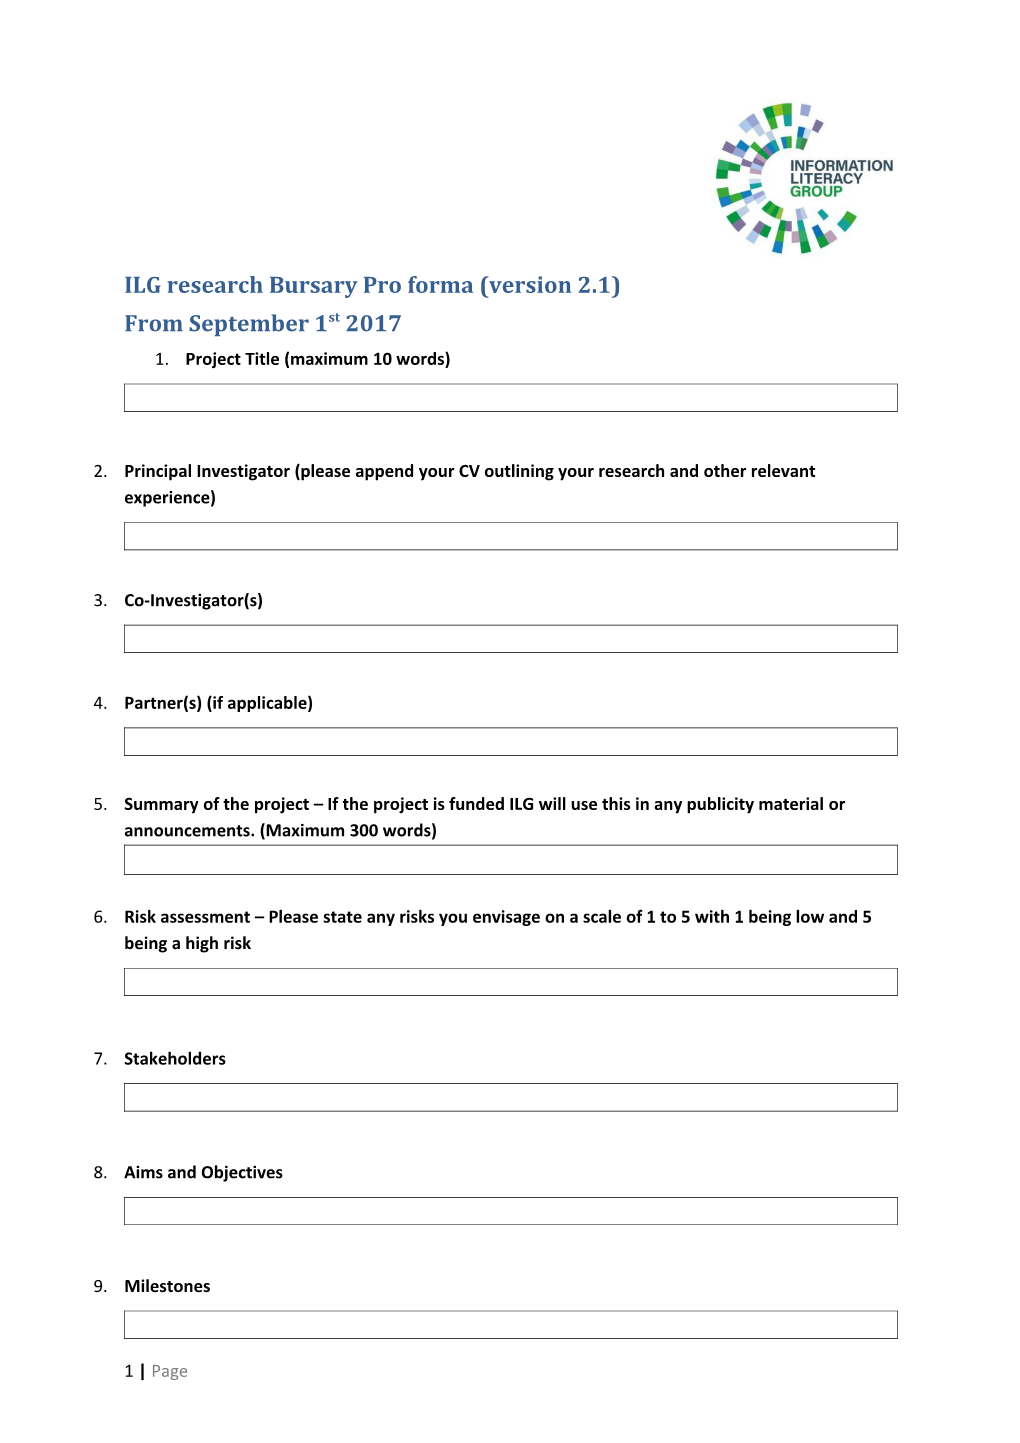 ILG Research Bid Proforma and Instructions FINAL